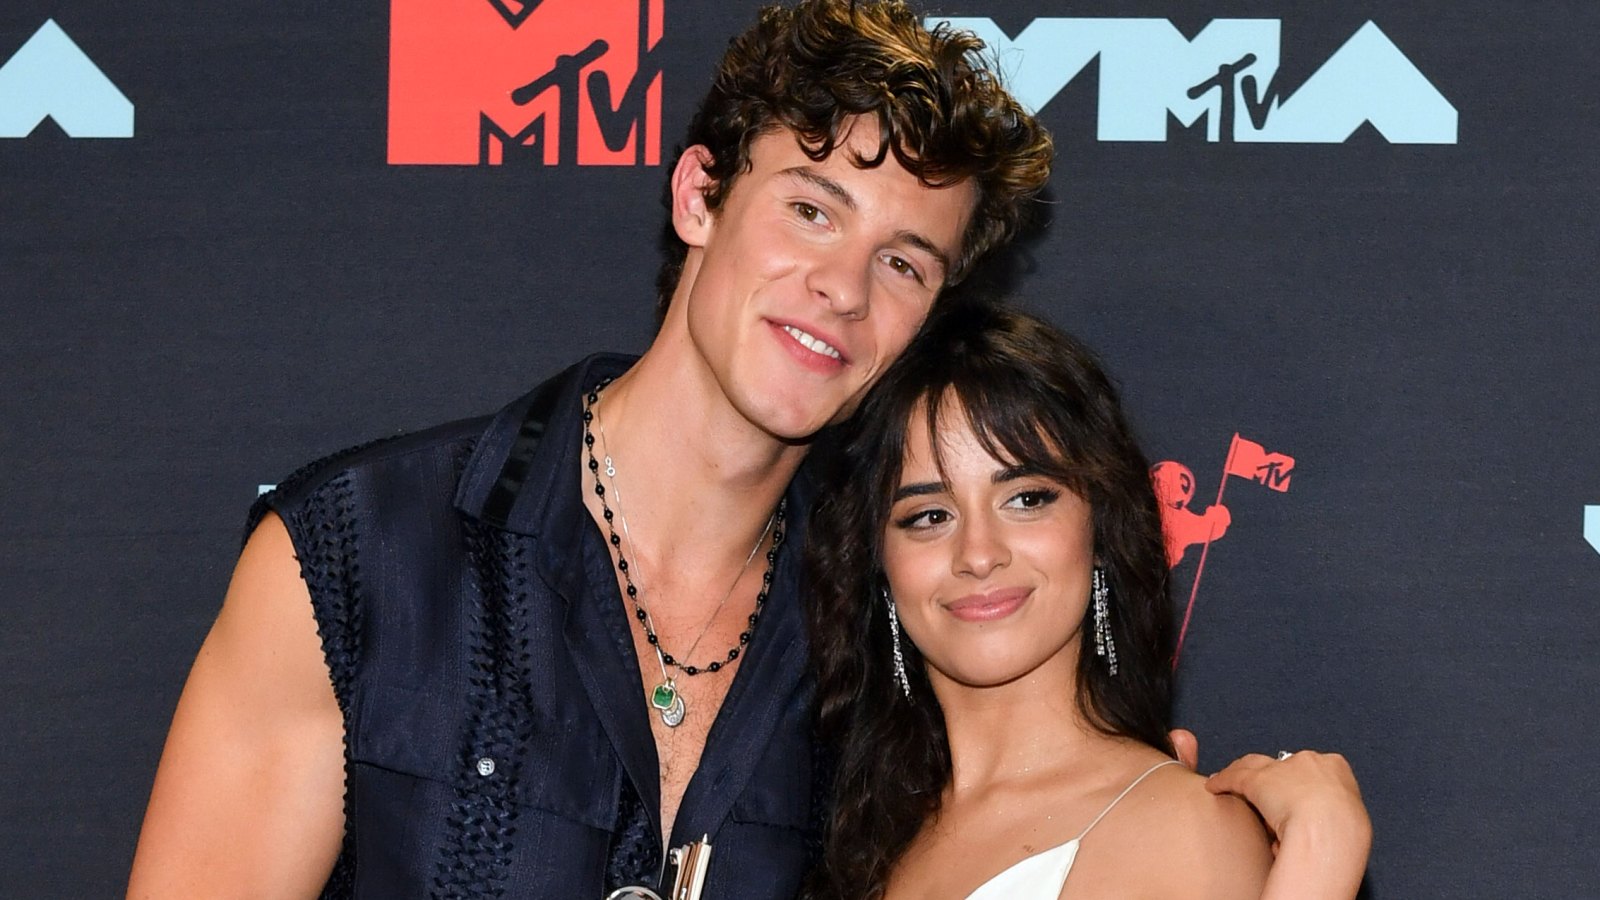 Shawn Mendes Dishes on Dates With Camila Cabello